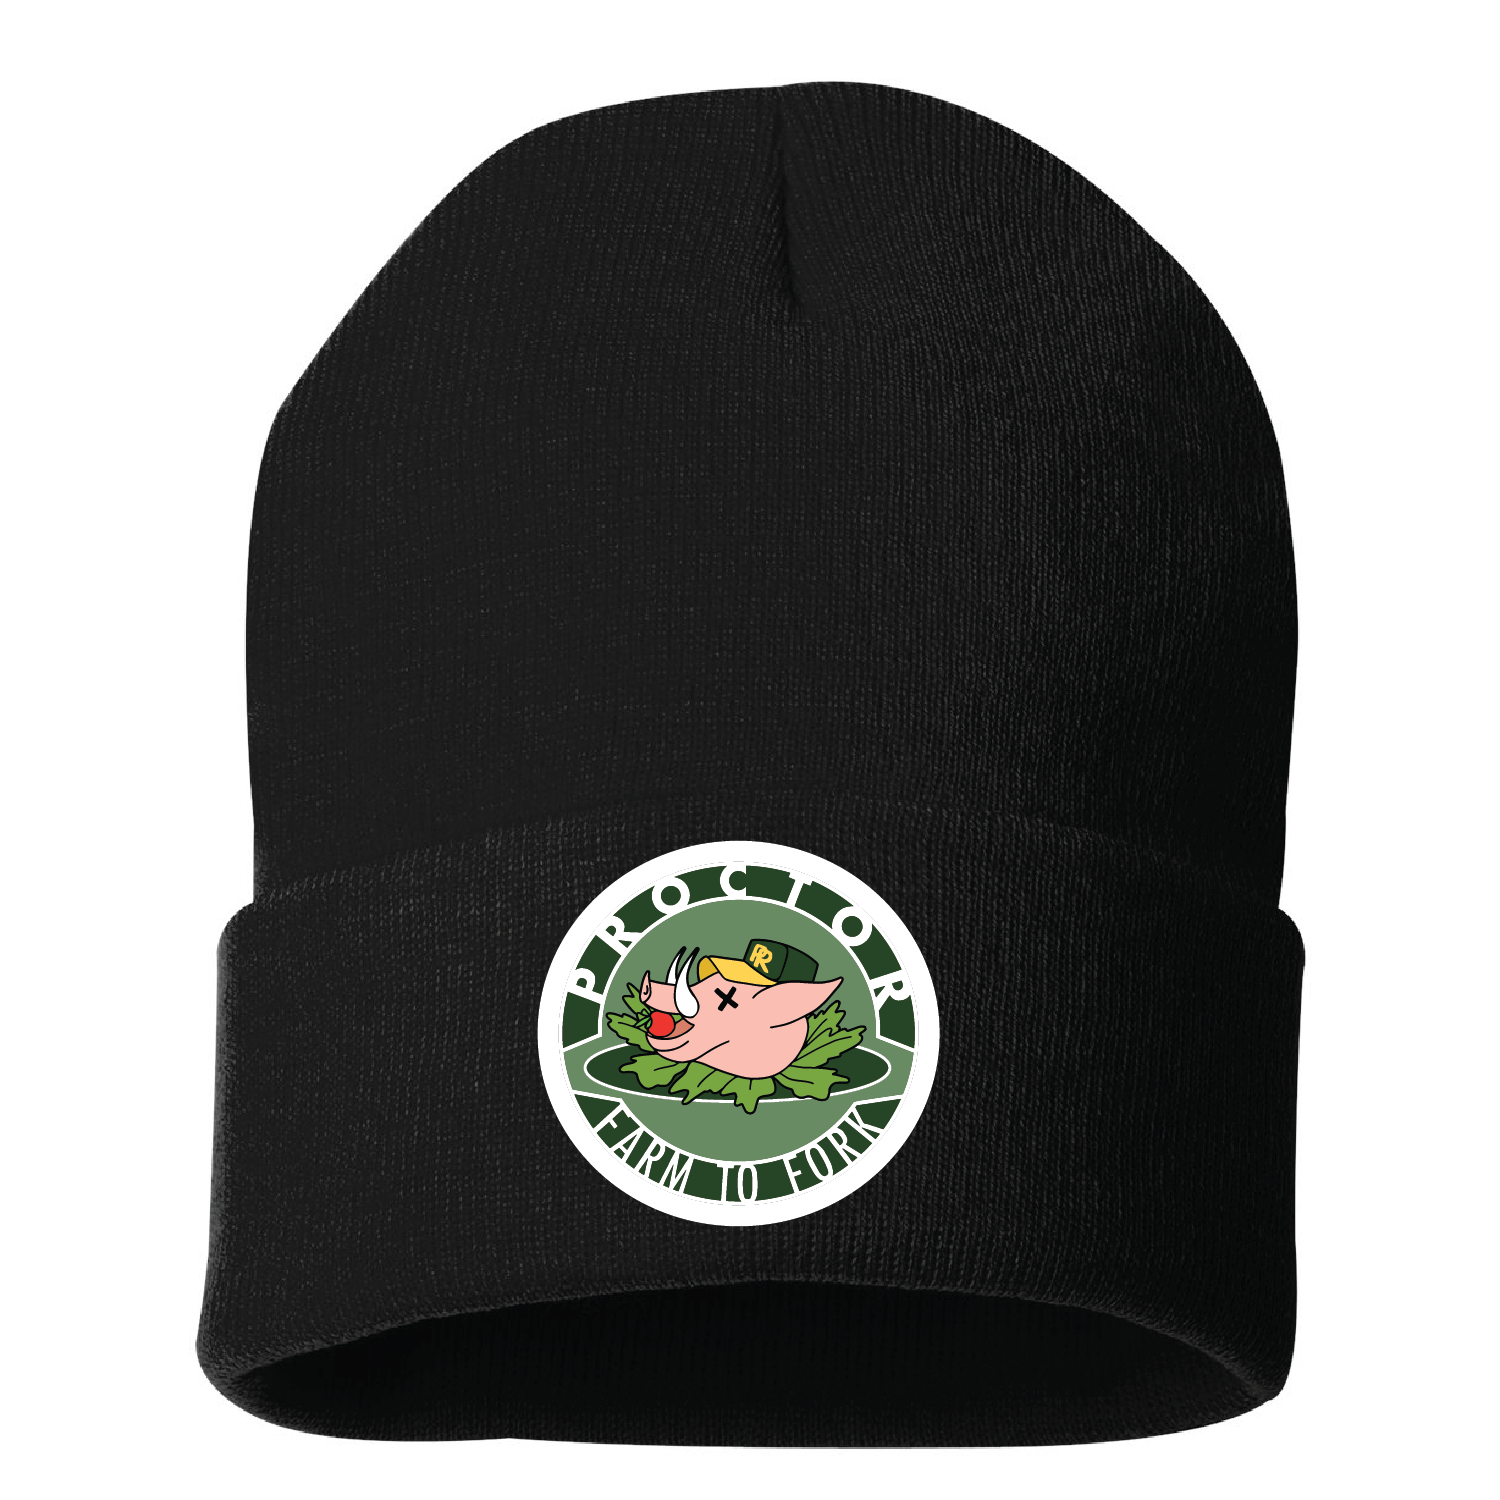 Proctor Farm to Fork Solid 12" Cuffed Beanie - DSP On Demand